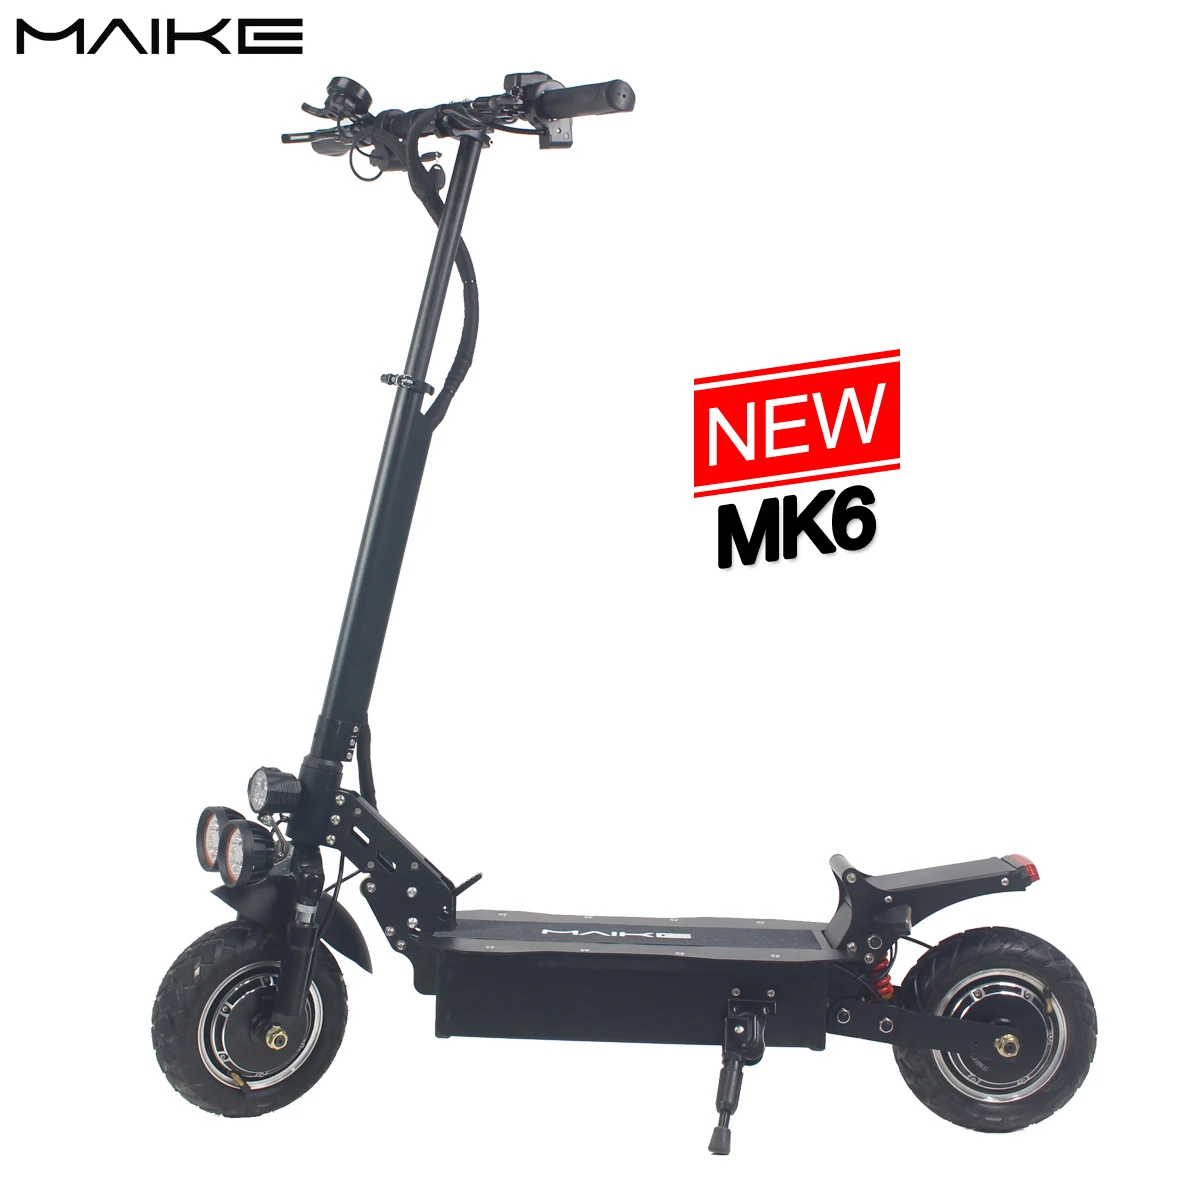 

China Good Price MAIKE mk6 48v 1000w 2000w dual motor scooter off road 10 inch wide wheel electric scooter high speed